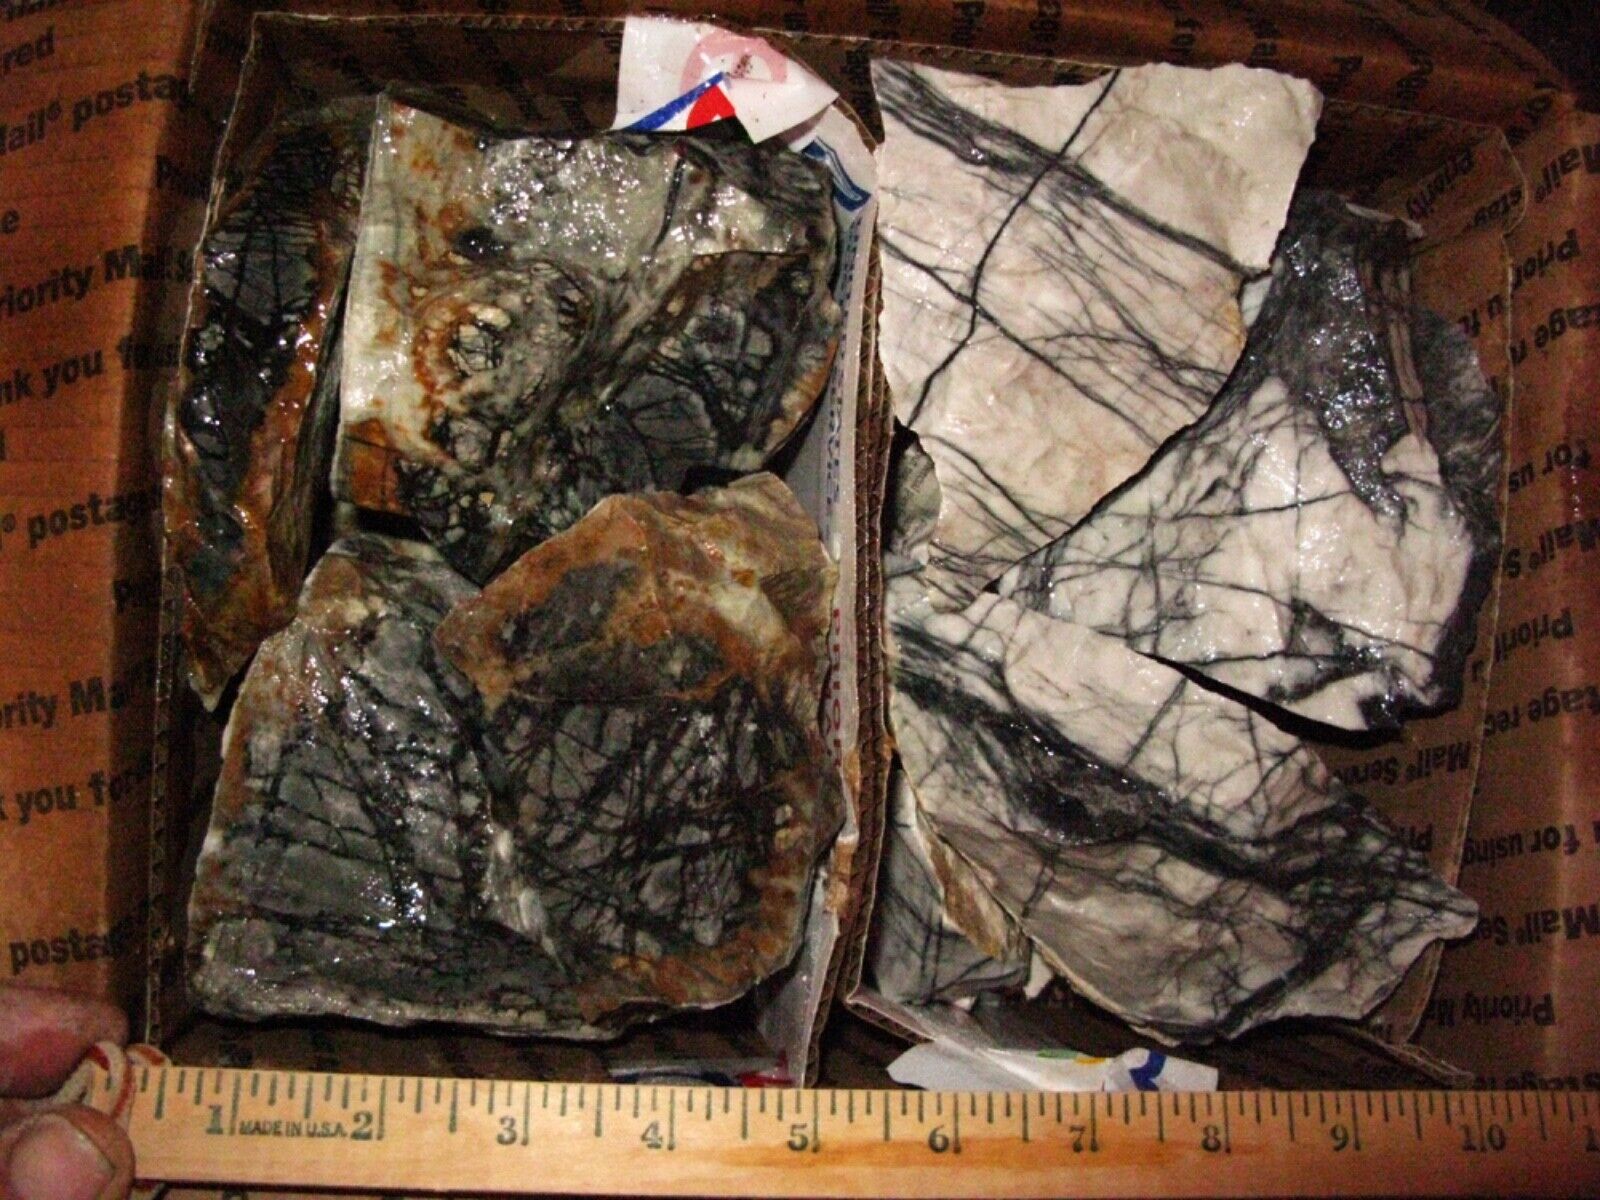 BOX OF PRIMO  1/2 PICASSO 1/2 SPIDER WEB MARBLE,CAB,SLAB,LAPIDARY 17+POUNDS